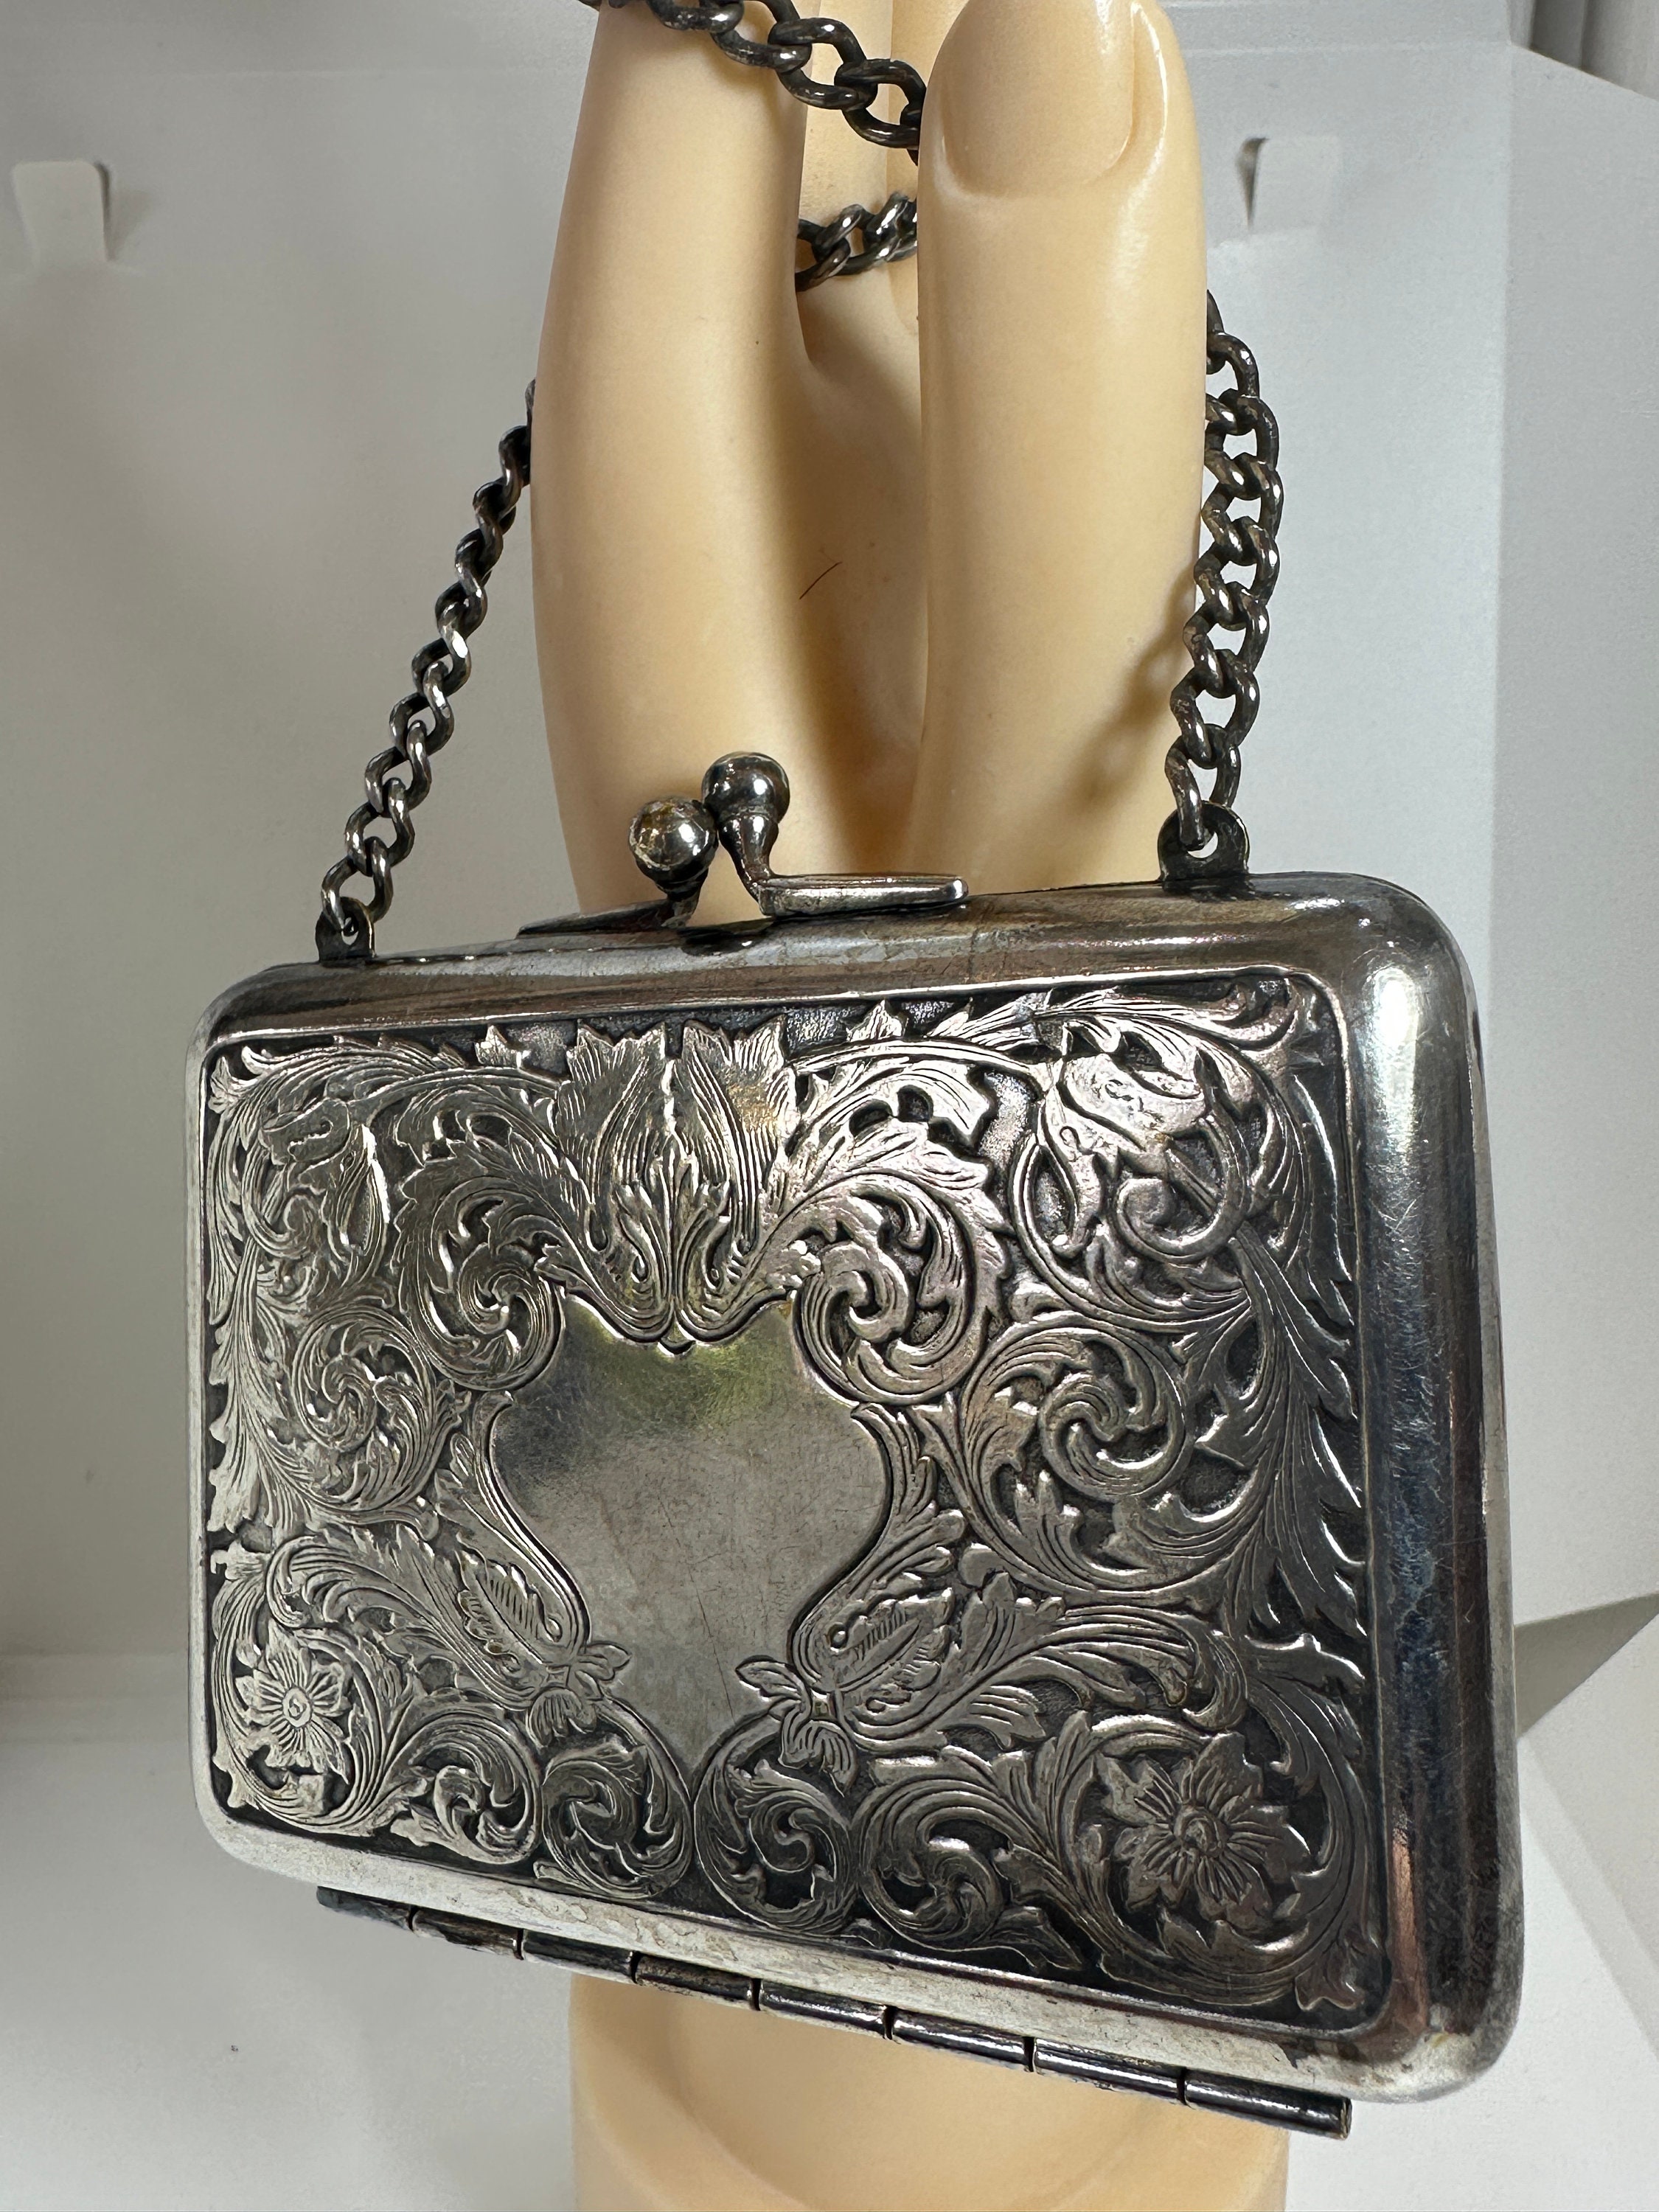 Antique C. 1900s Sterling Silver Chatelaine Purse, Birmingham John Gloster  Ltd for Sale in San Diego, CA - OfferUp